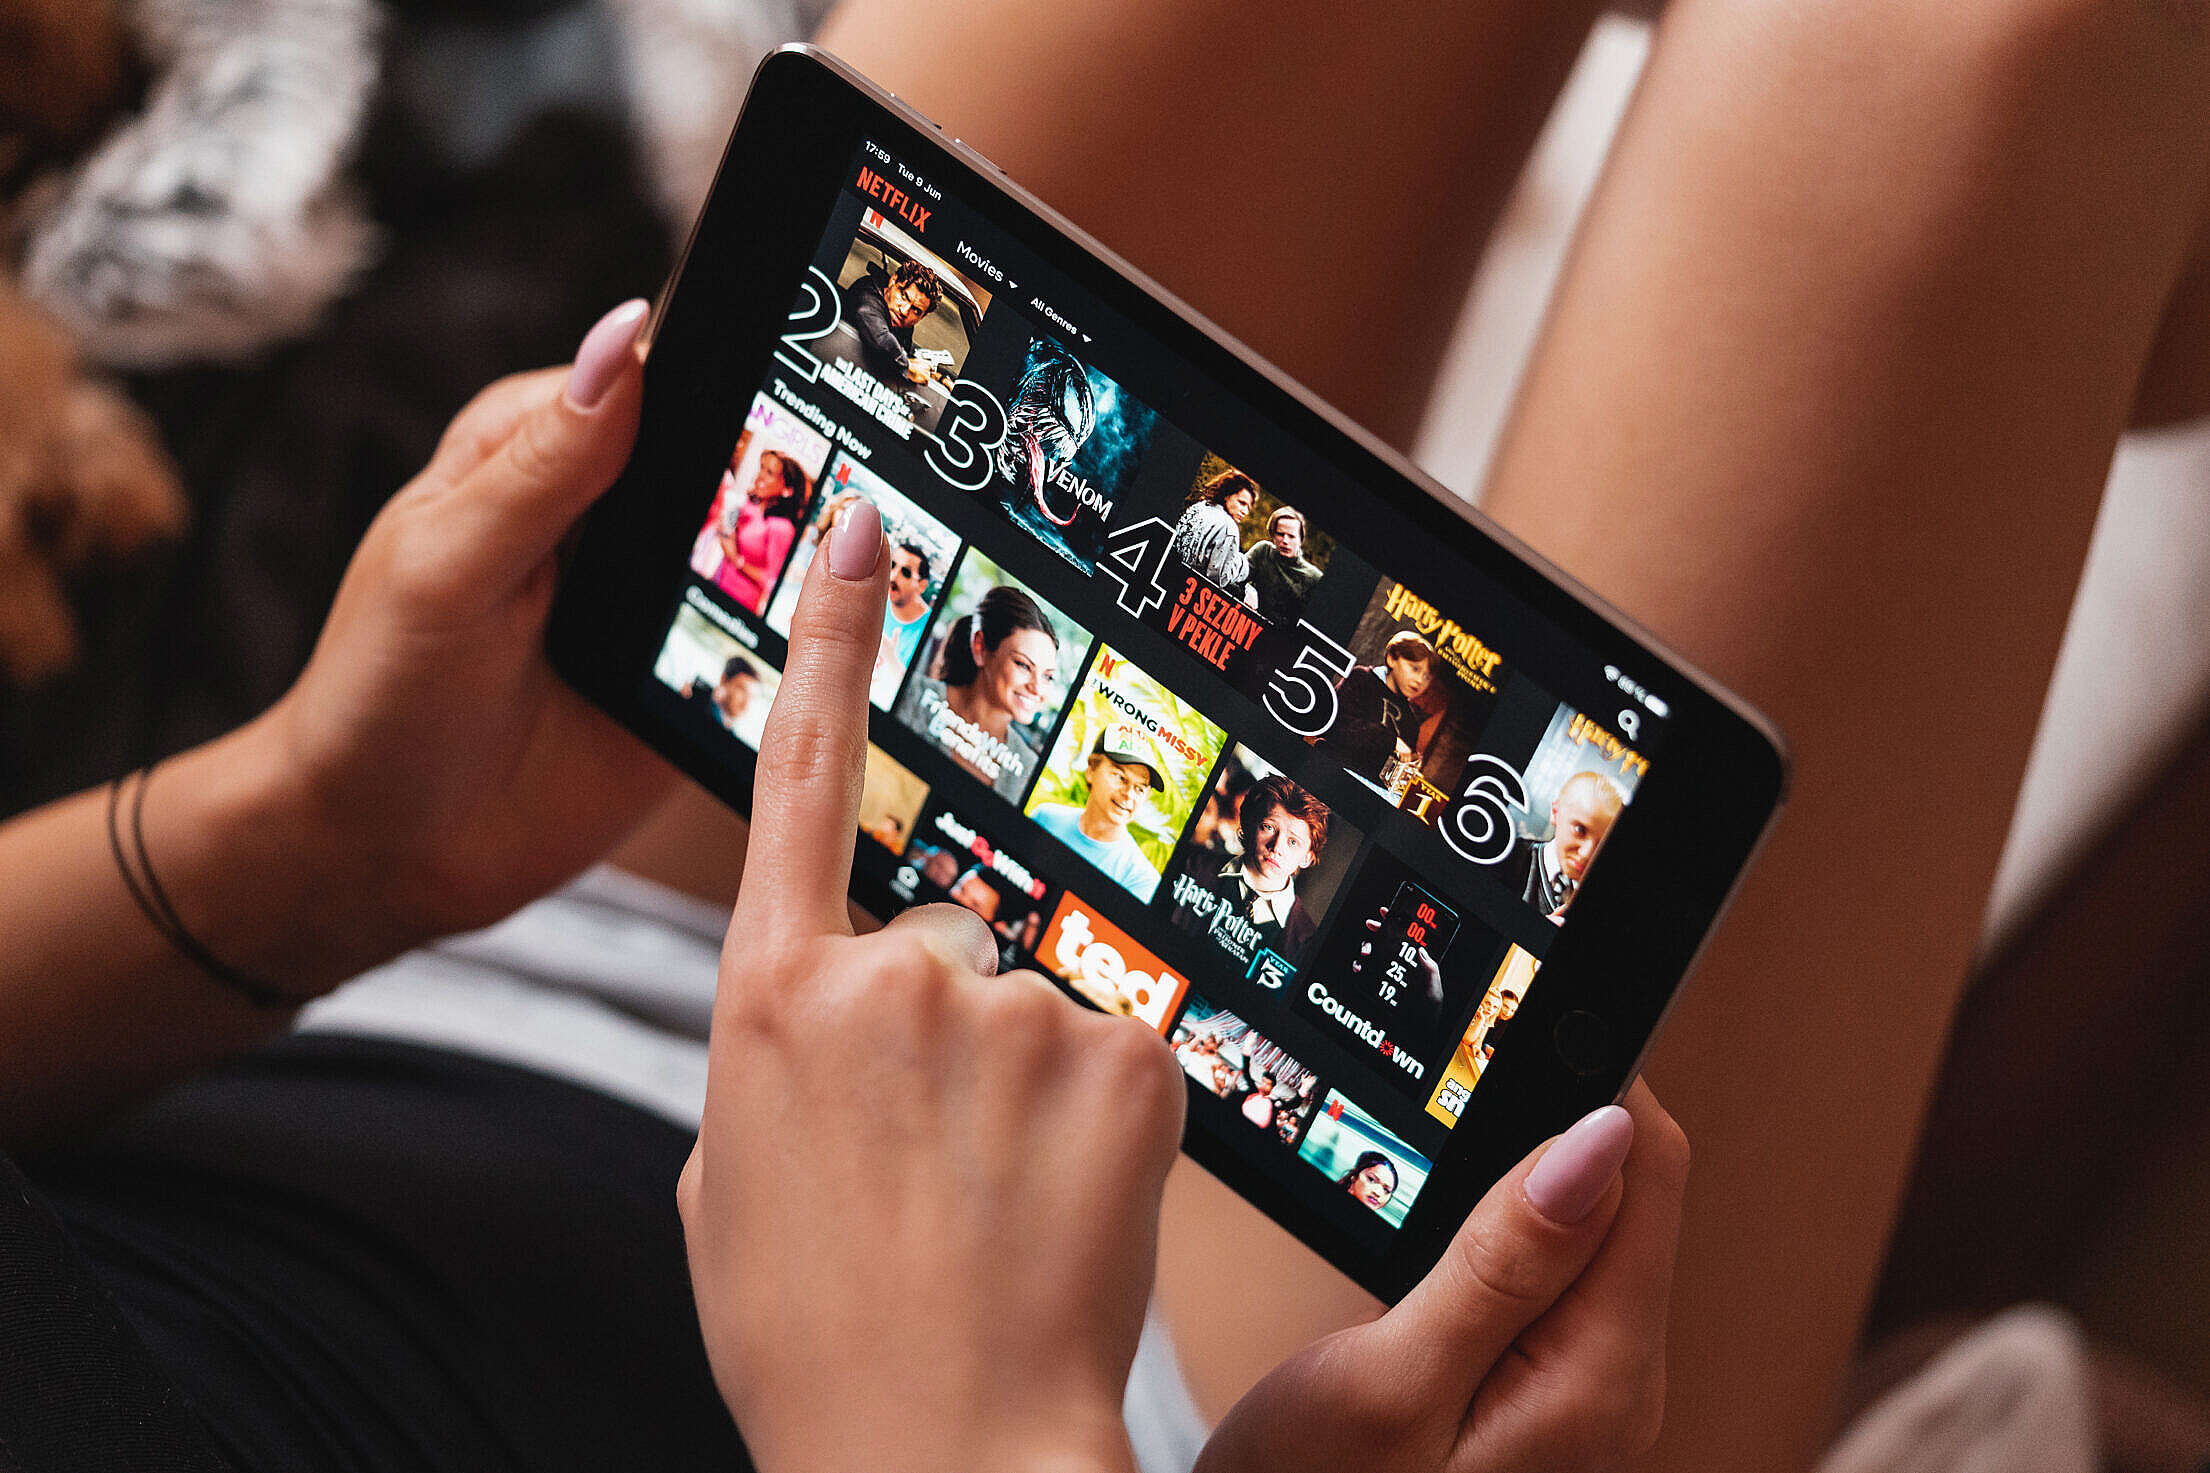 Girls Selecting Which Movie to Watch in Netflix App Free Stock Photo